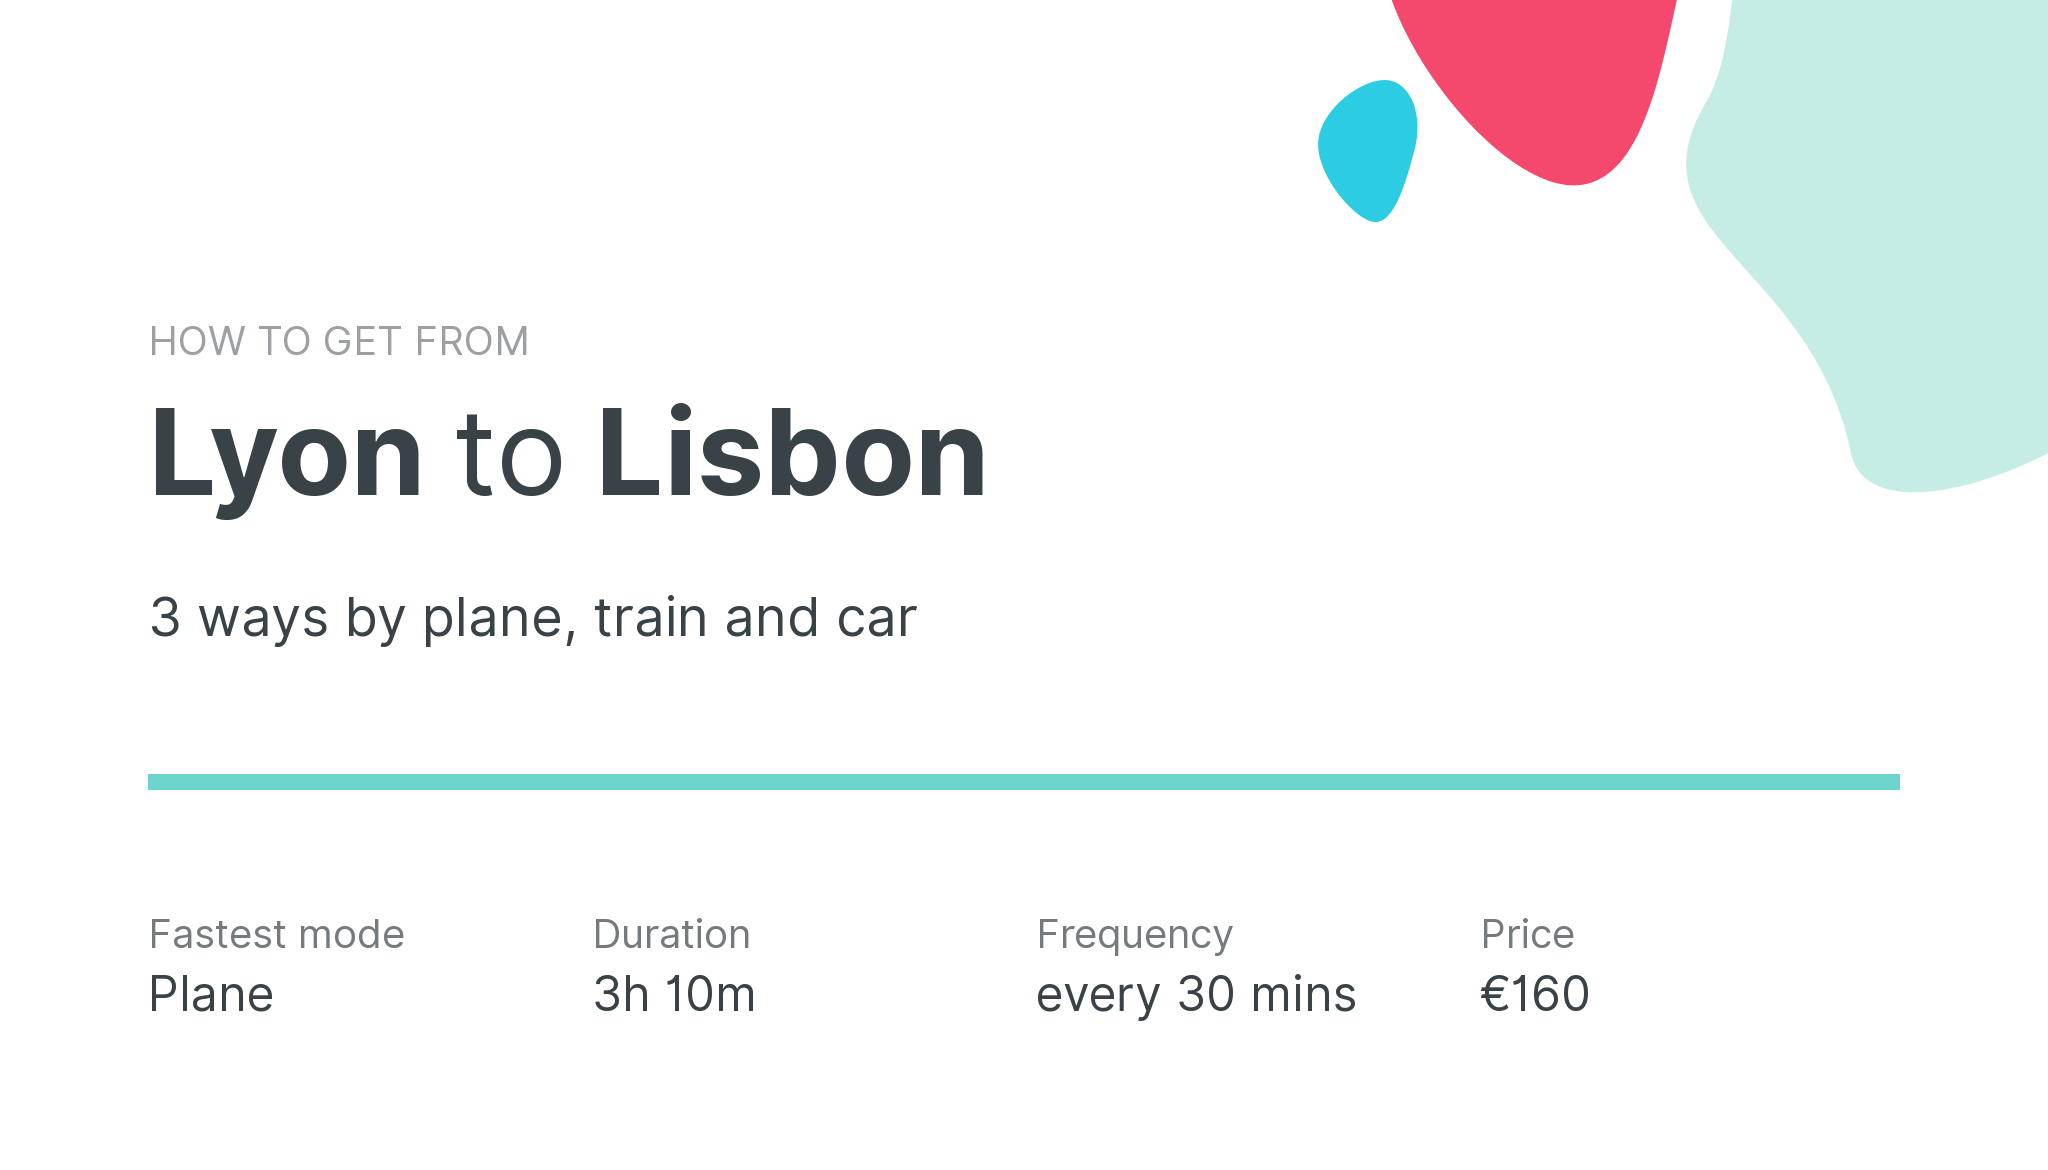 How do I get from Lyon to Lisbon